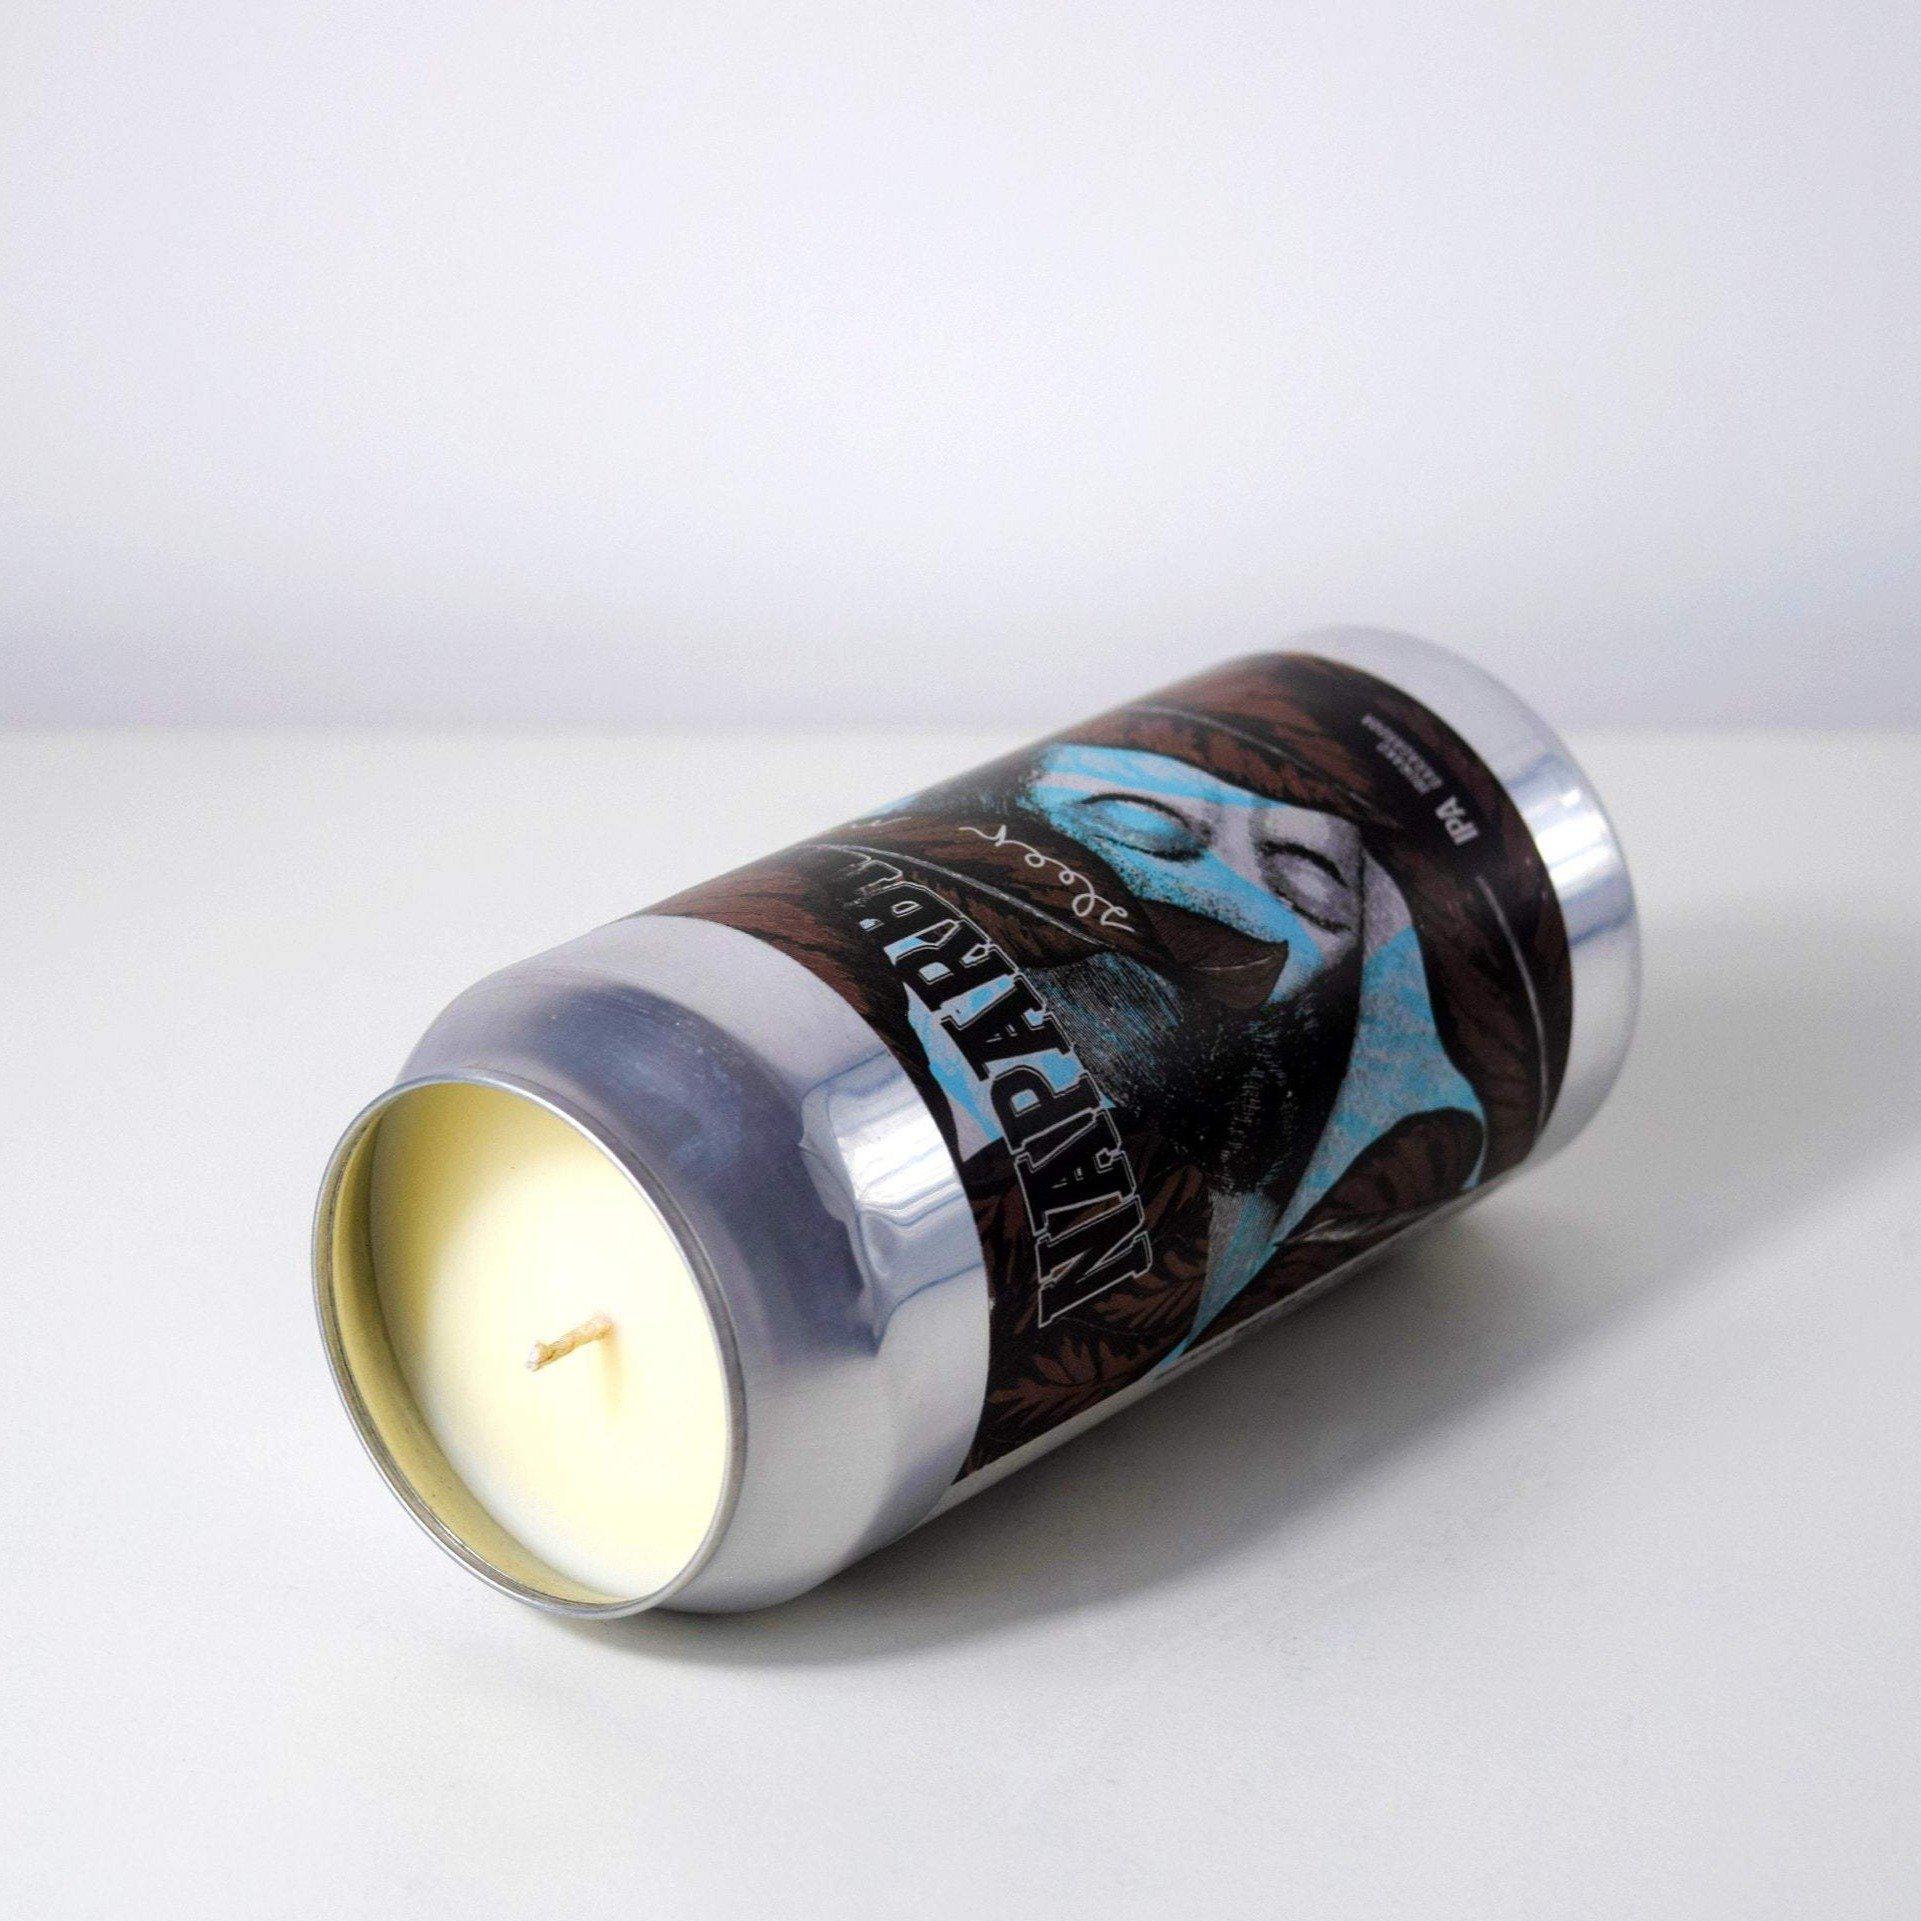 Naparbier Sleep Now Beer Can Candle-Beer Can Candles-Adhock Homeware